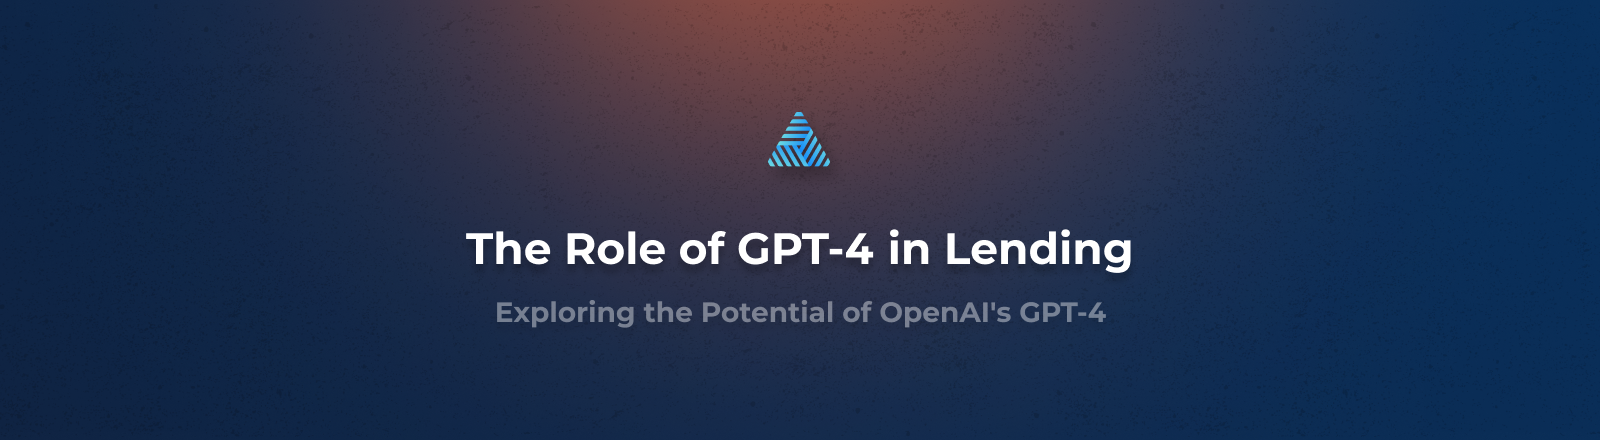 The Role of GPT-4 in Lending